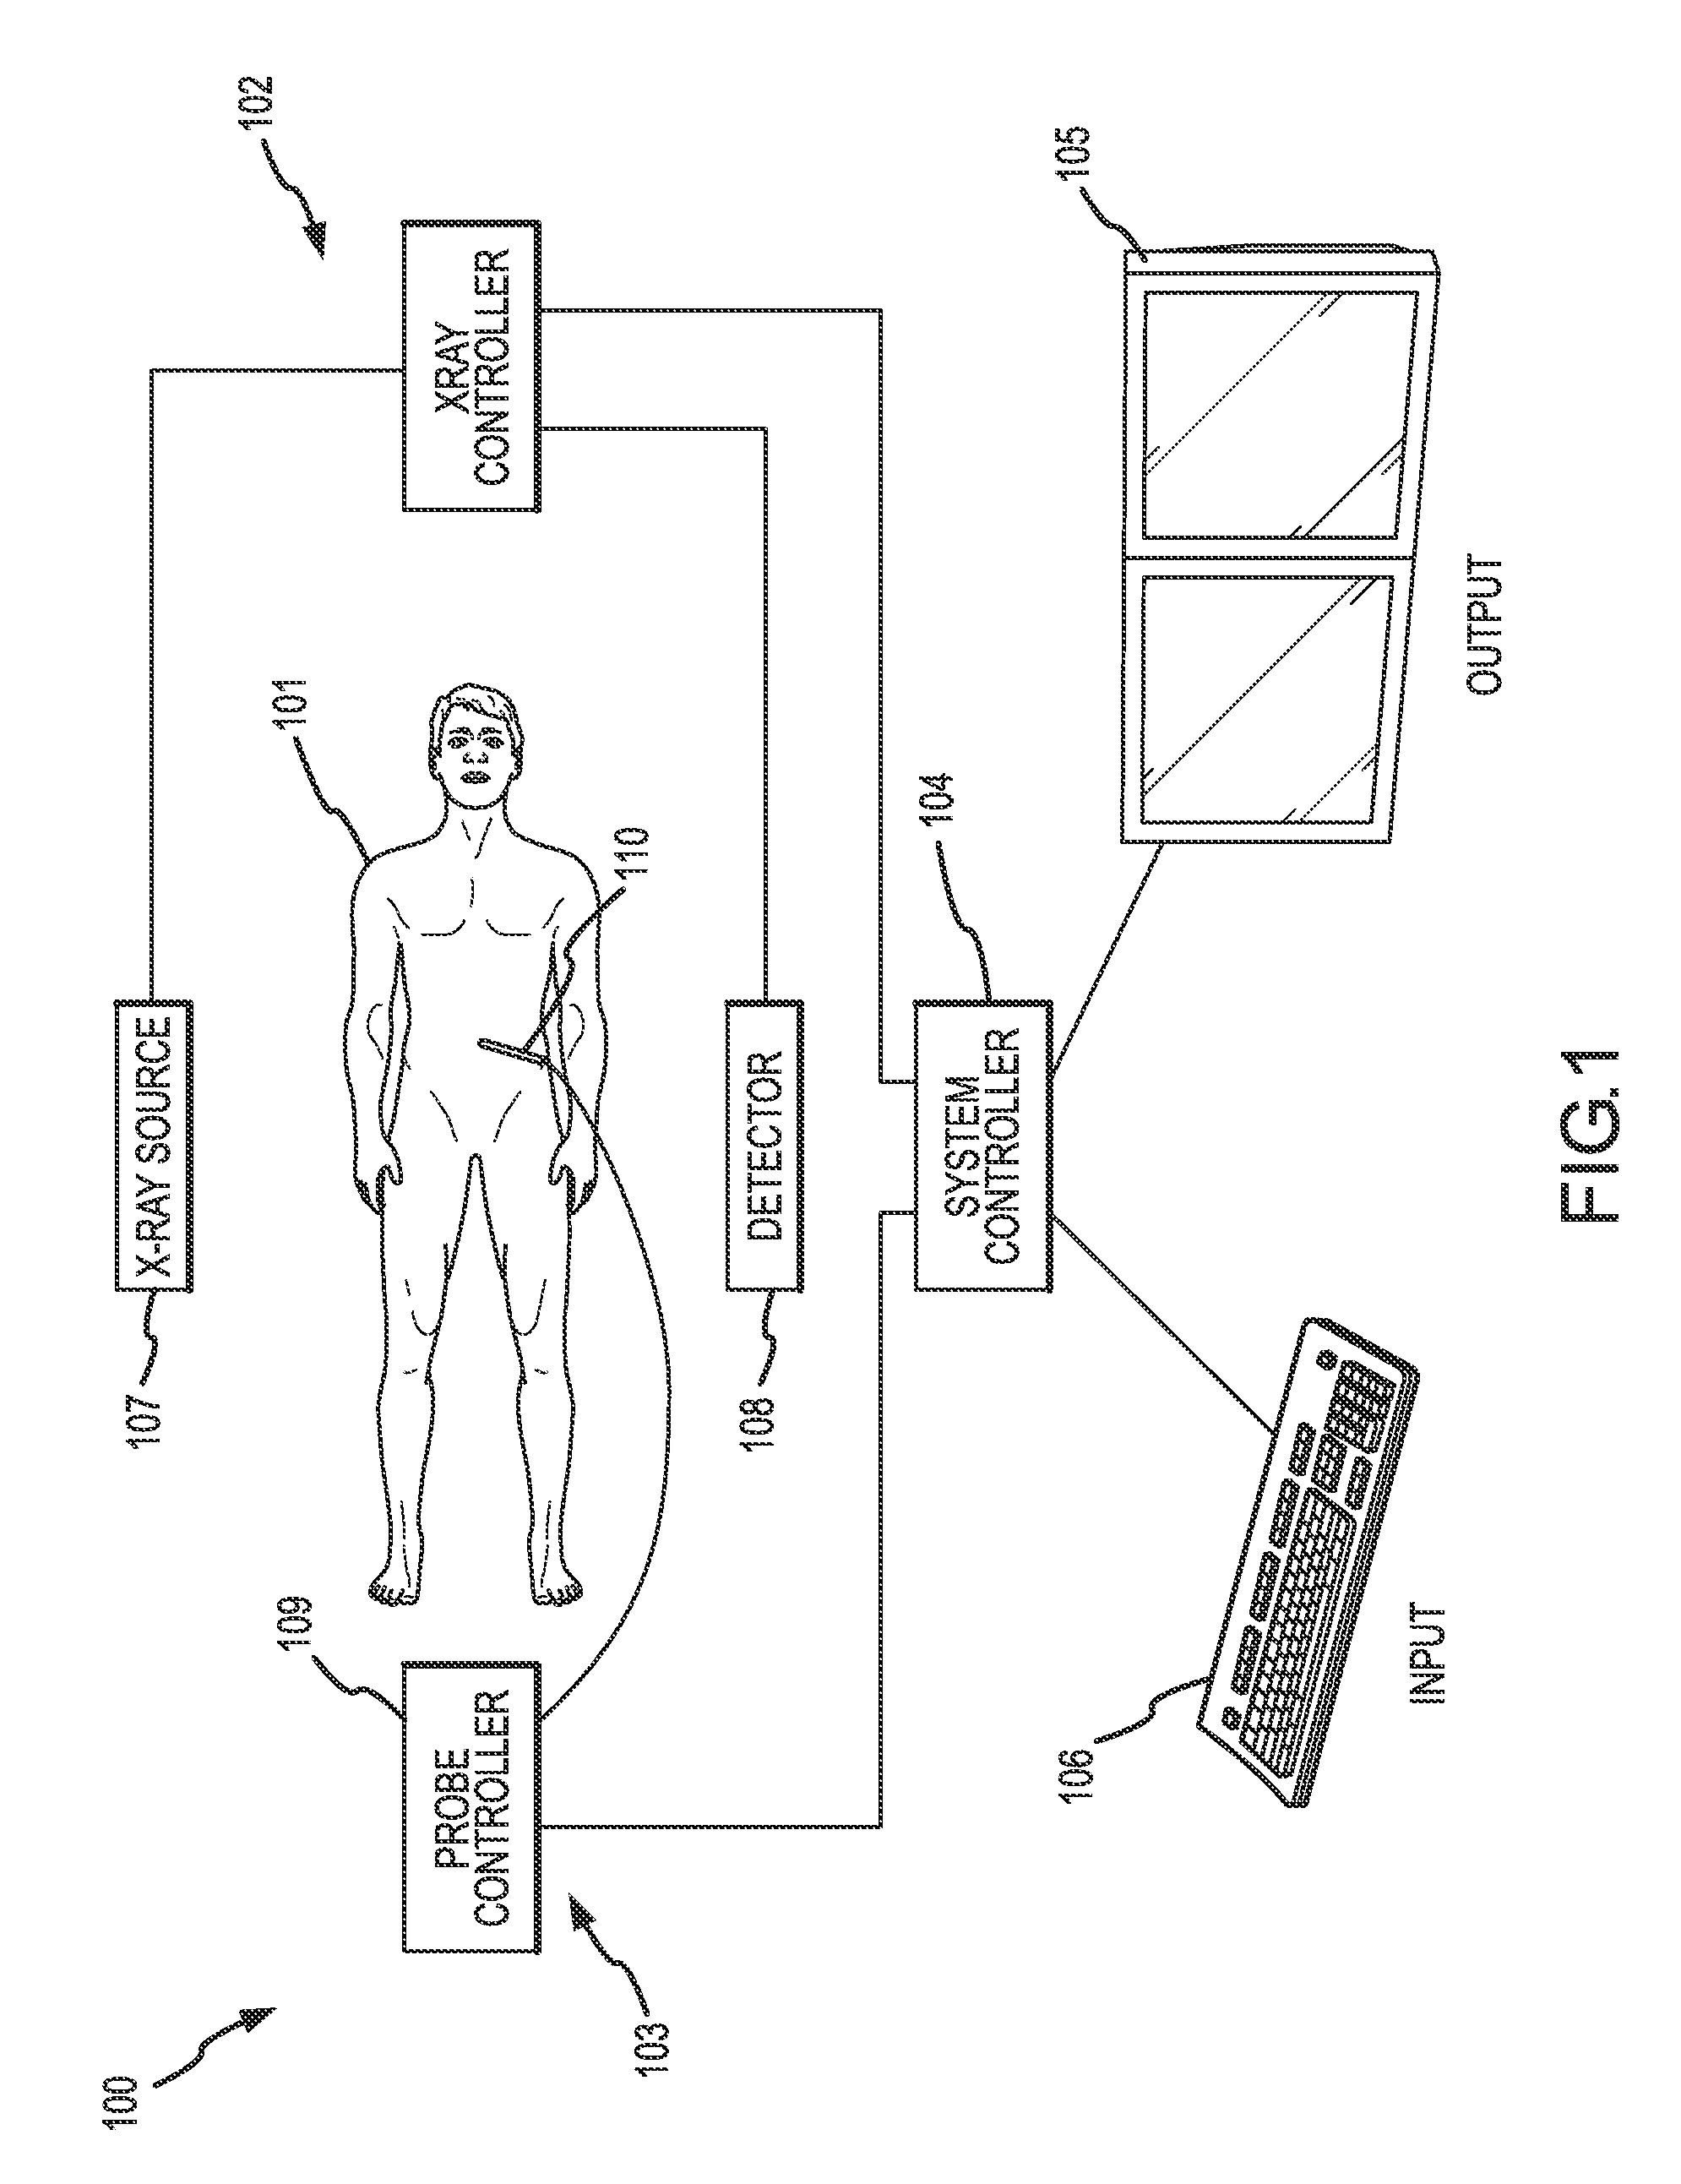 Methods And Apparatuses For Planning, Performing, Monitoring And Assessing Thermal Ablation